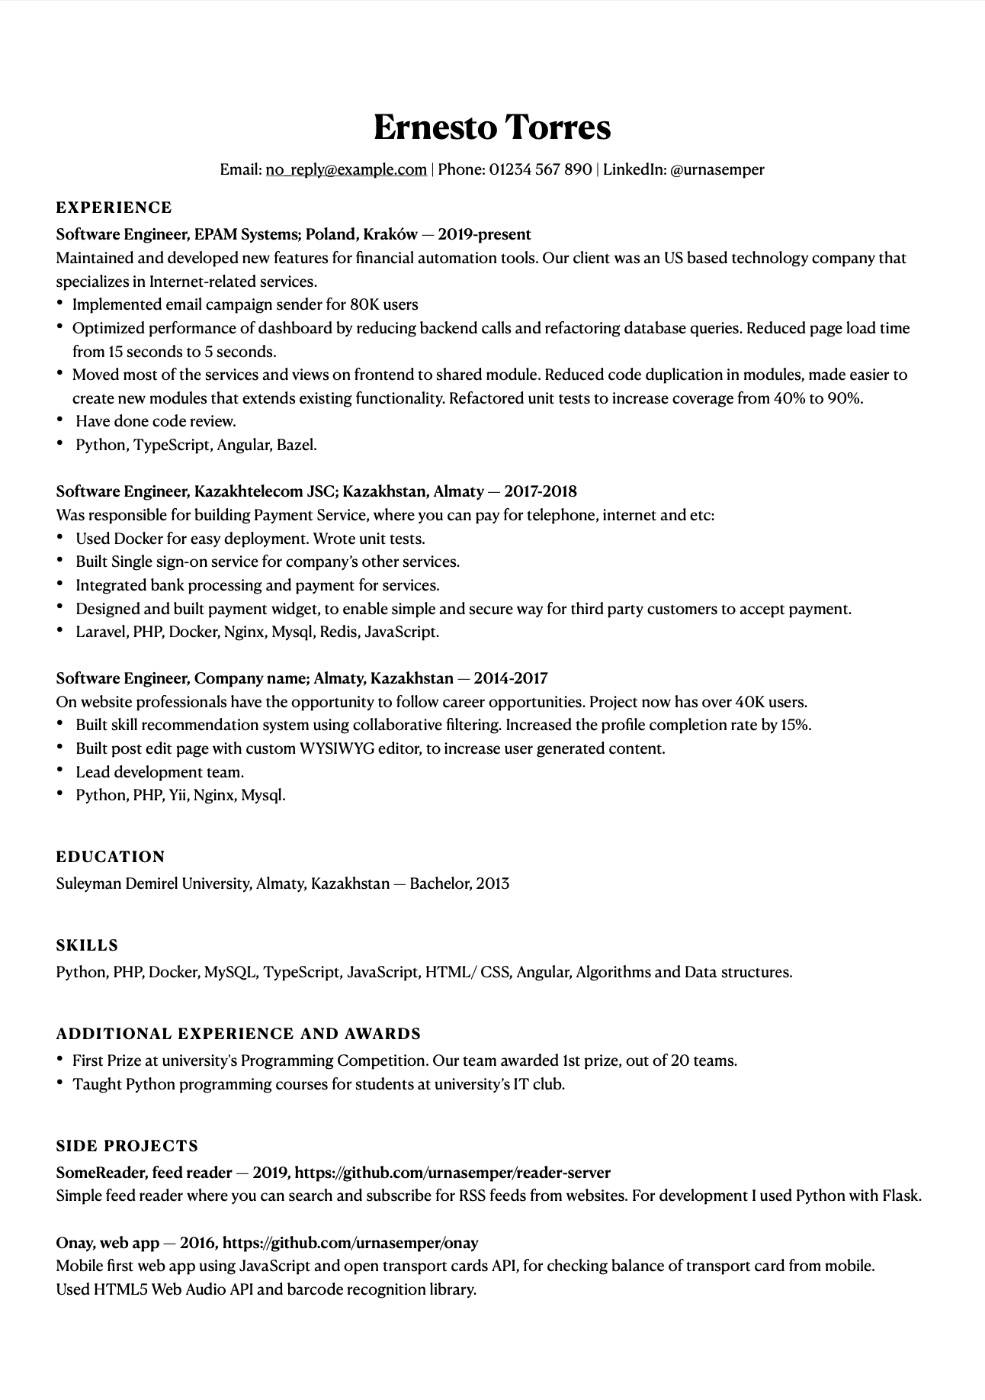 My anonymized resume